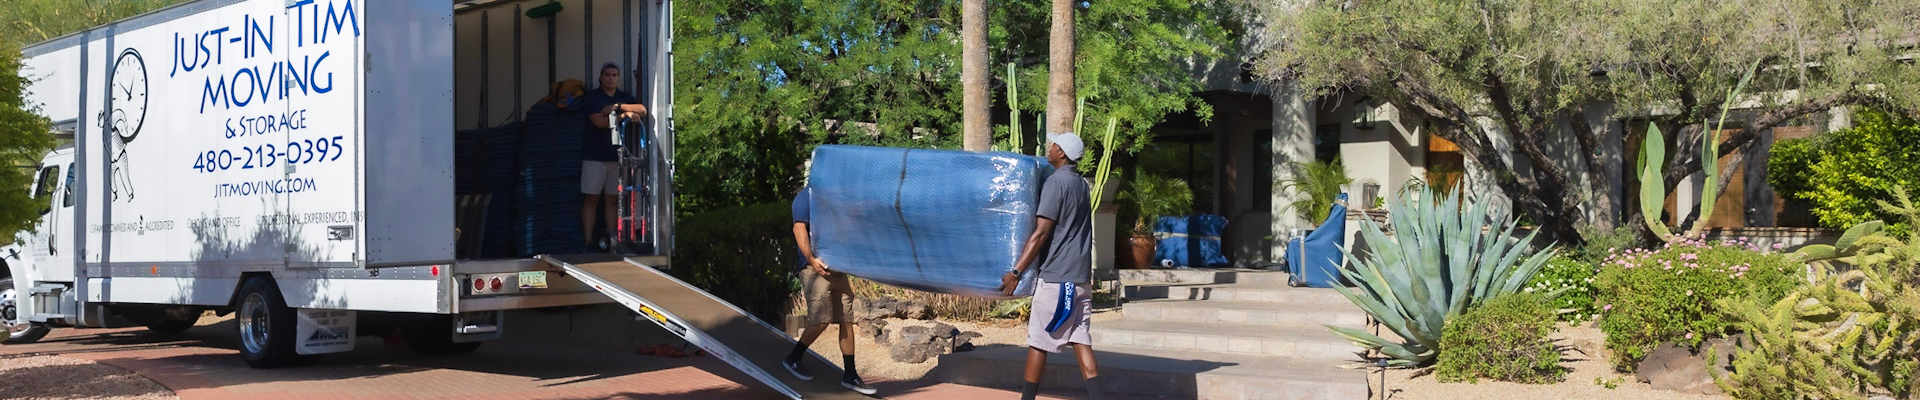 Your Local Movers in Phoenix- AZ JIT Moving - Just-in Time Moving and Storage